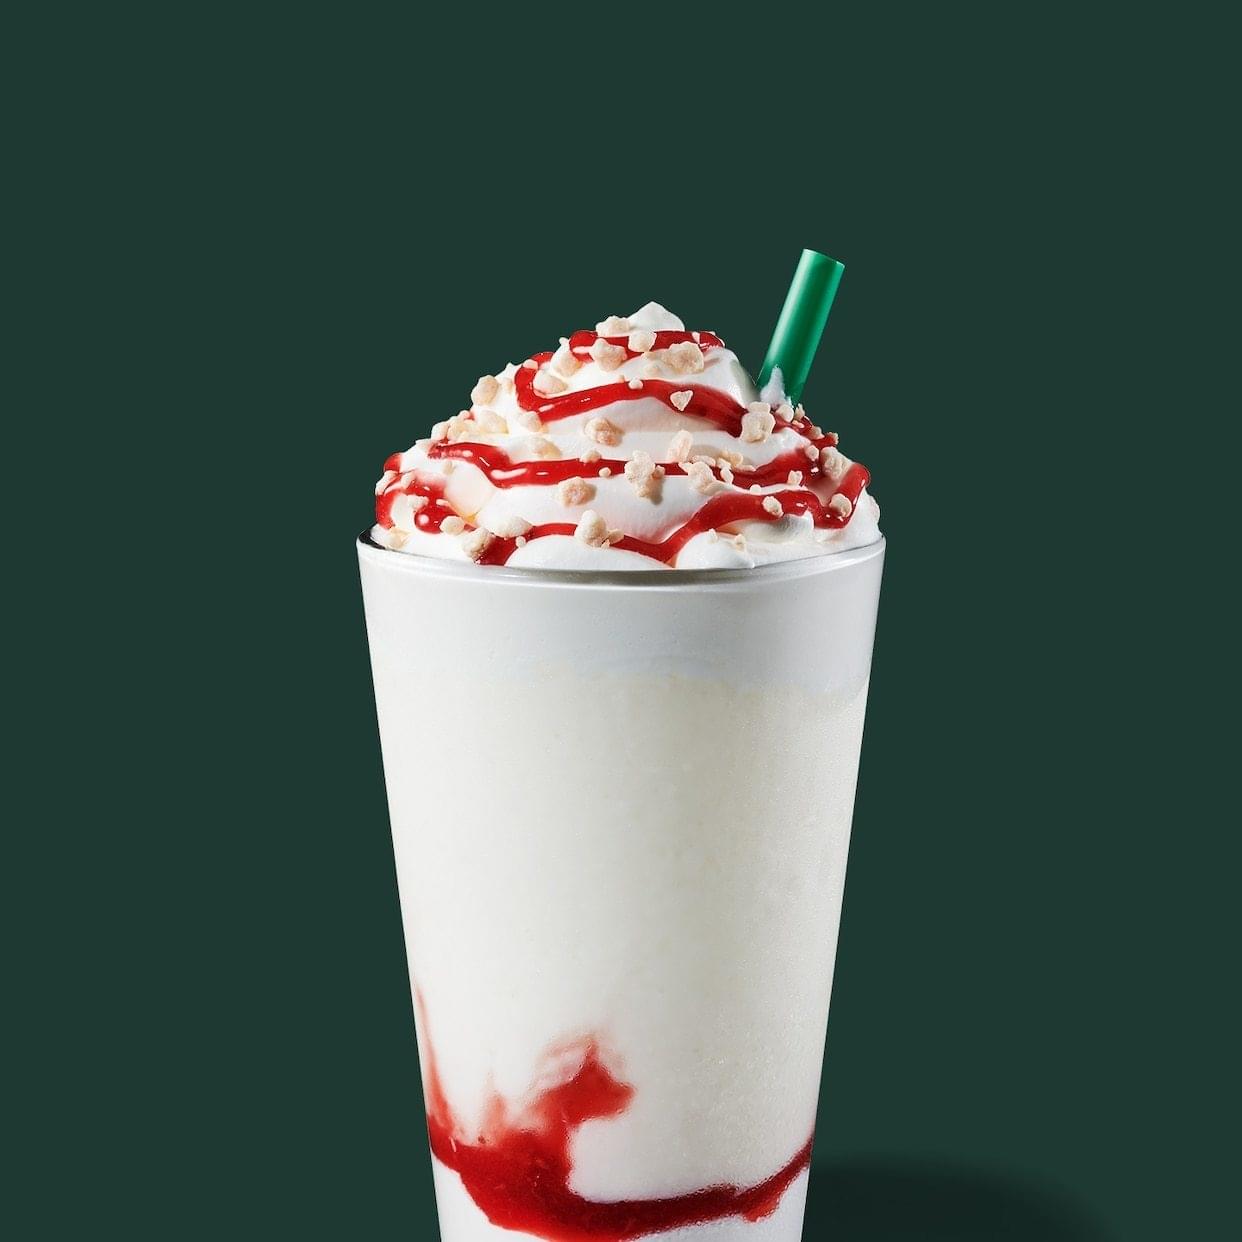 Starbucks Tall Strawberry Funnel Cake Creme Frappuccino Nutrition Facts